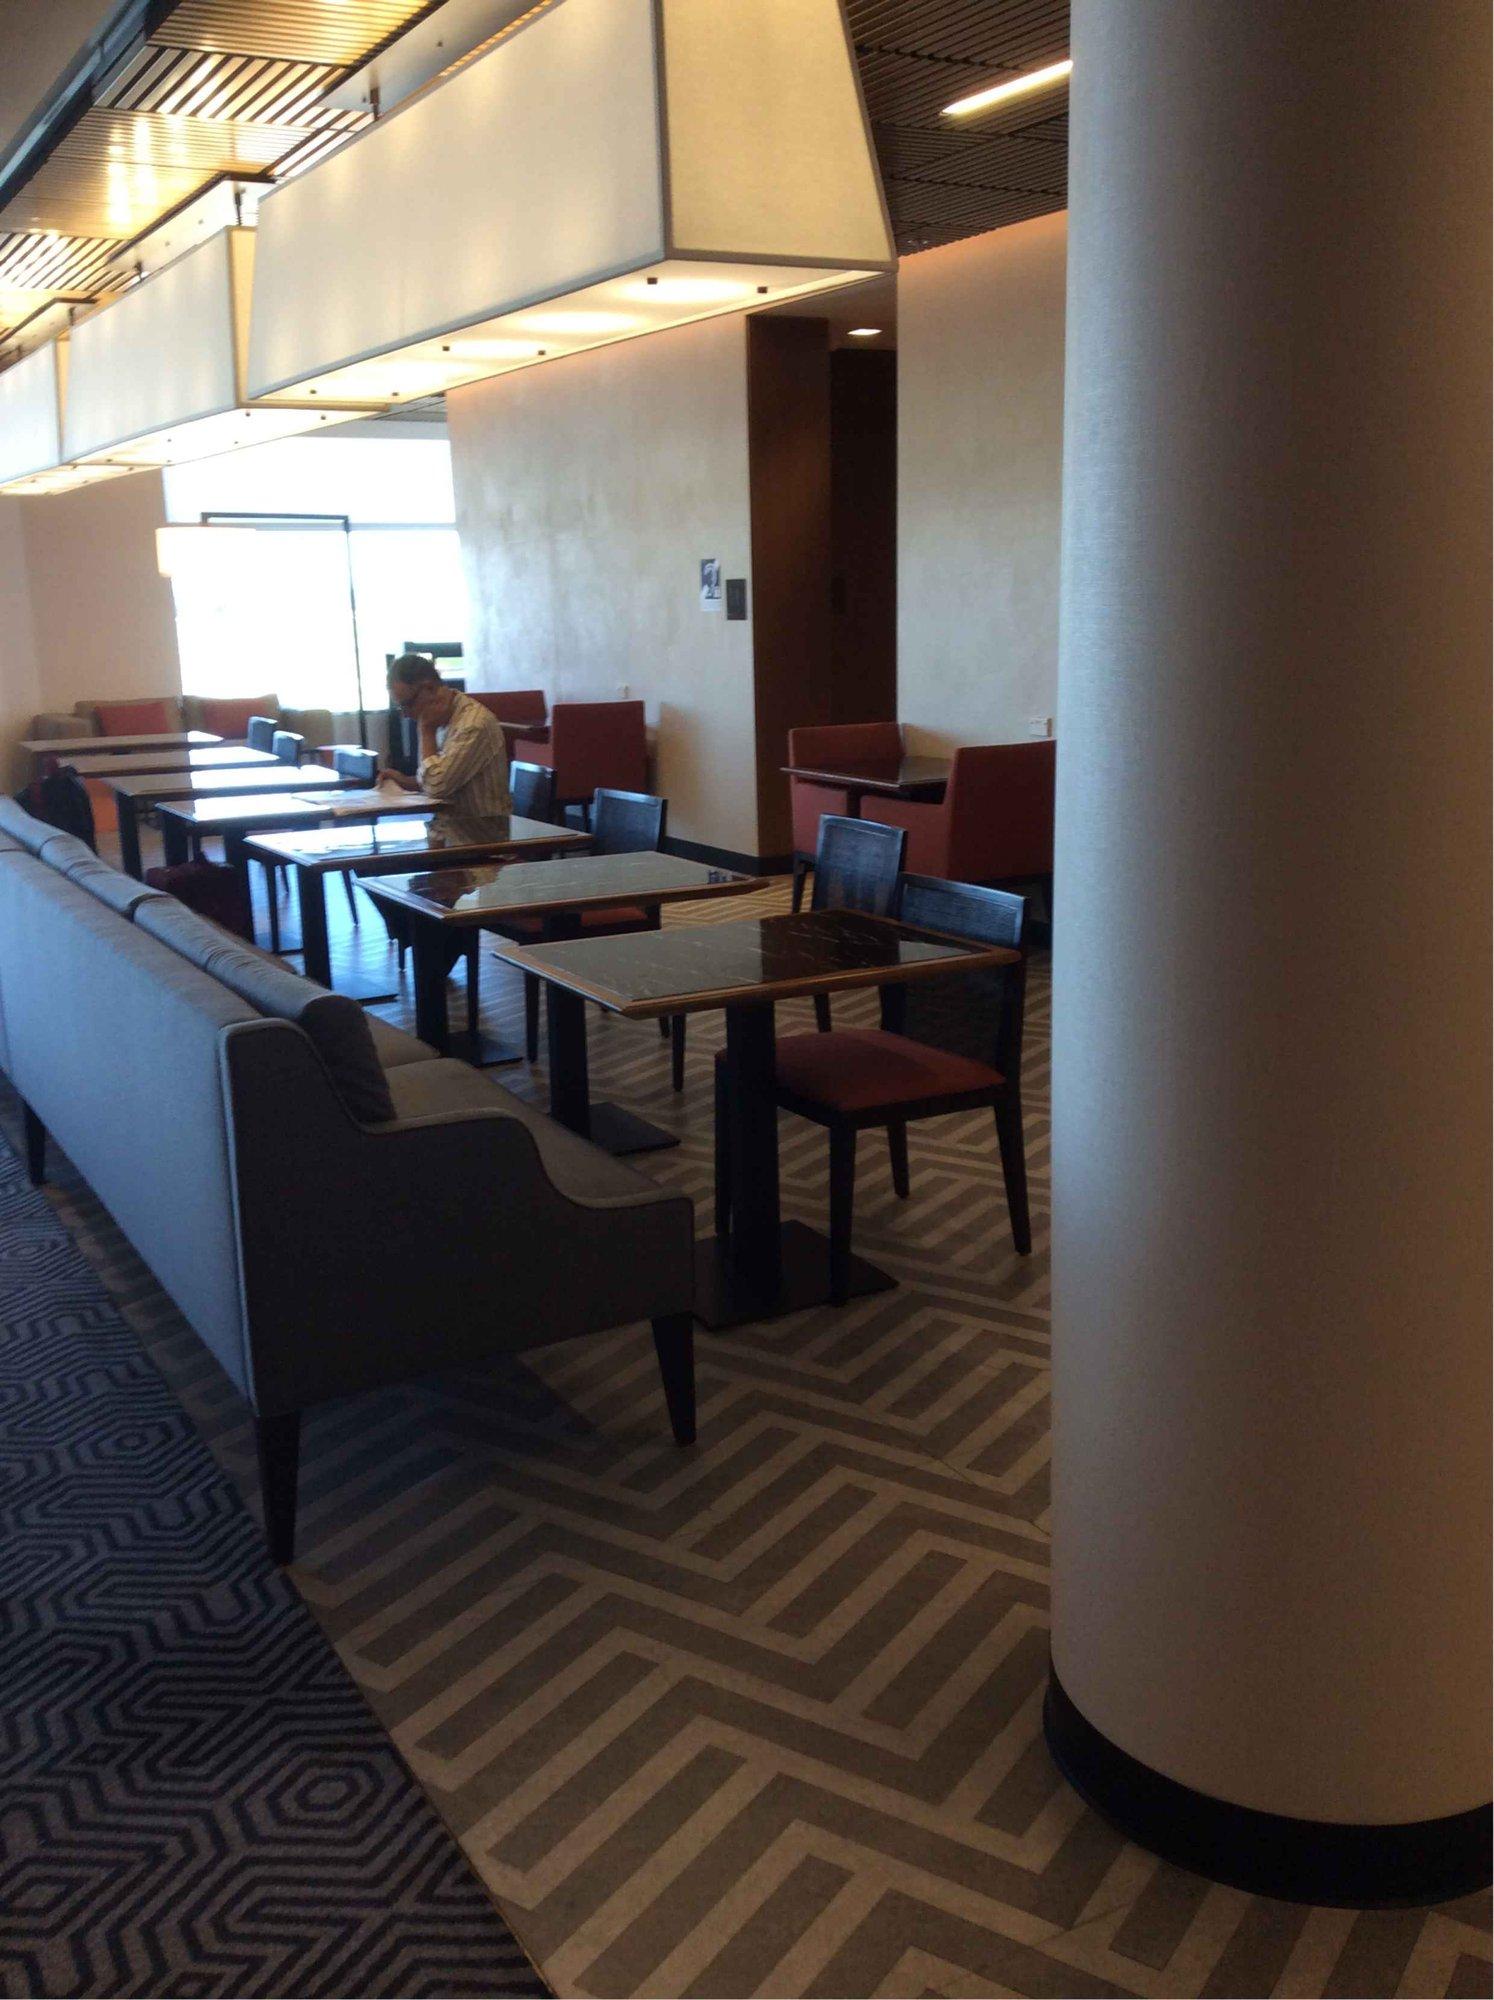 Singapore Airlines SilverKris Business Class Lounge image 7 of 20